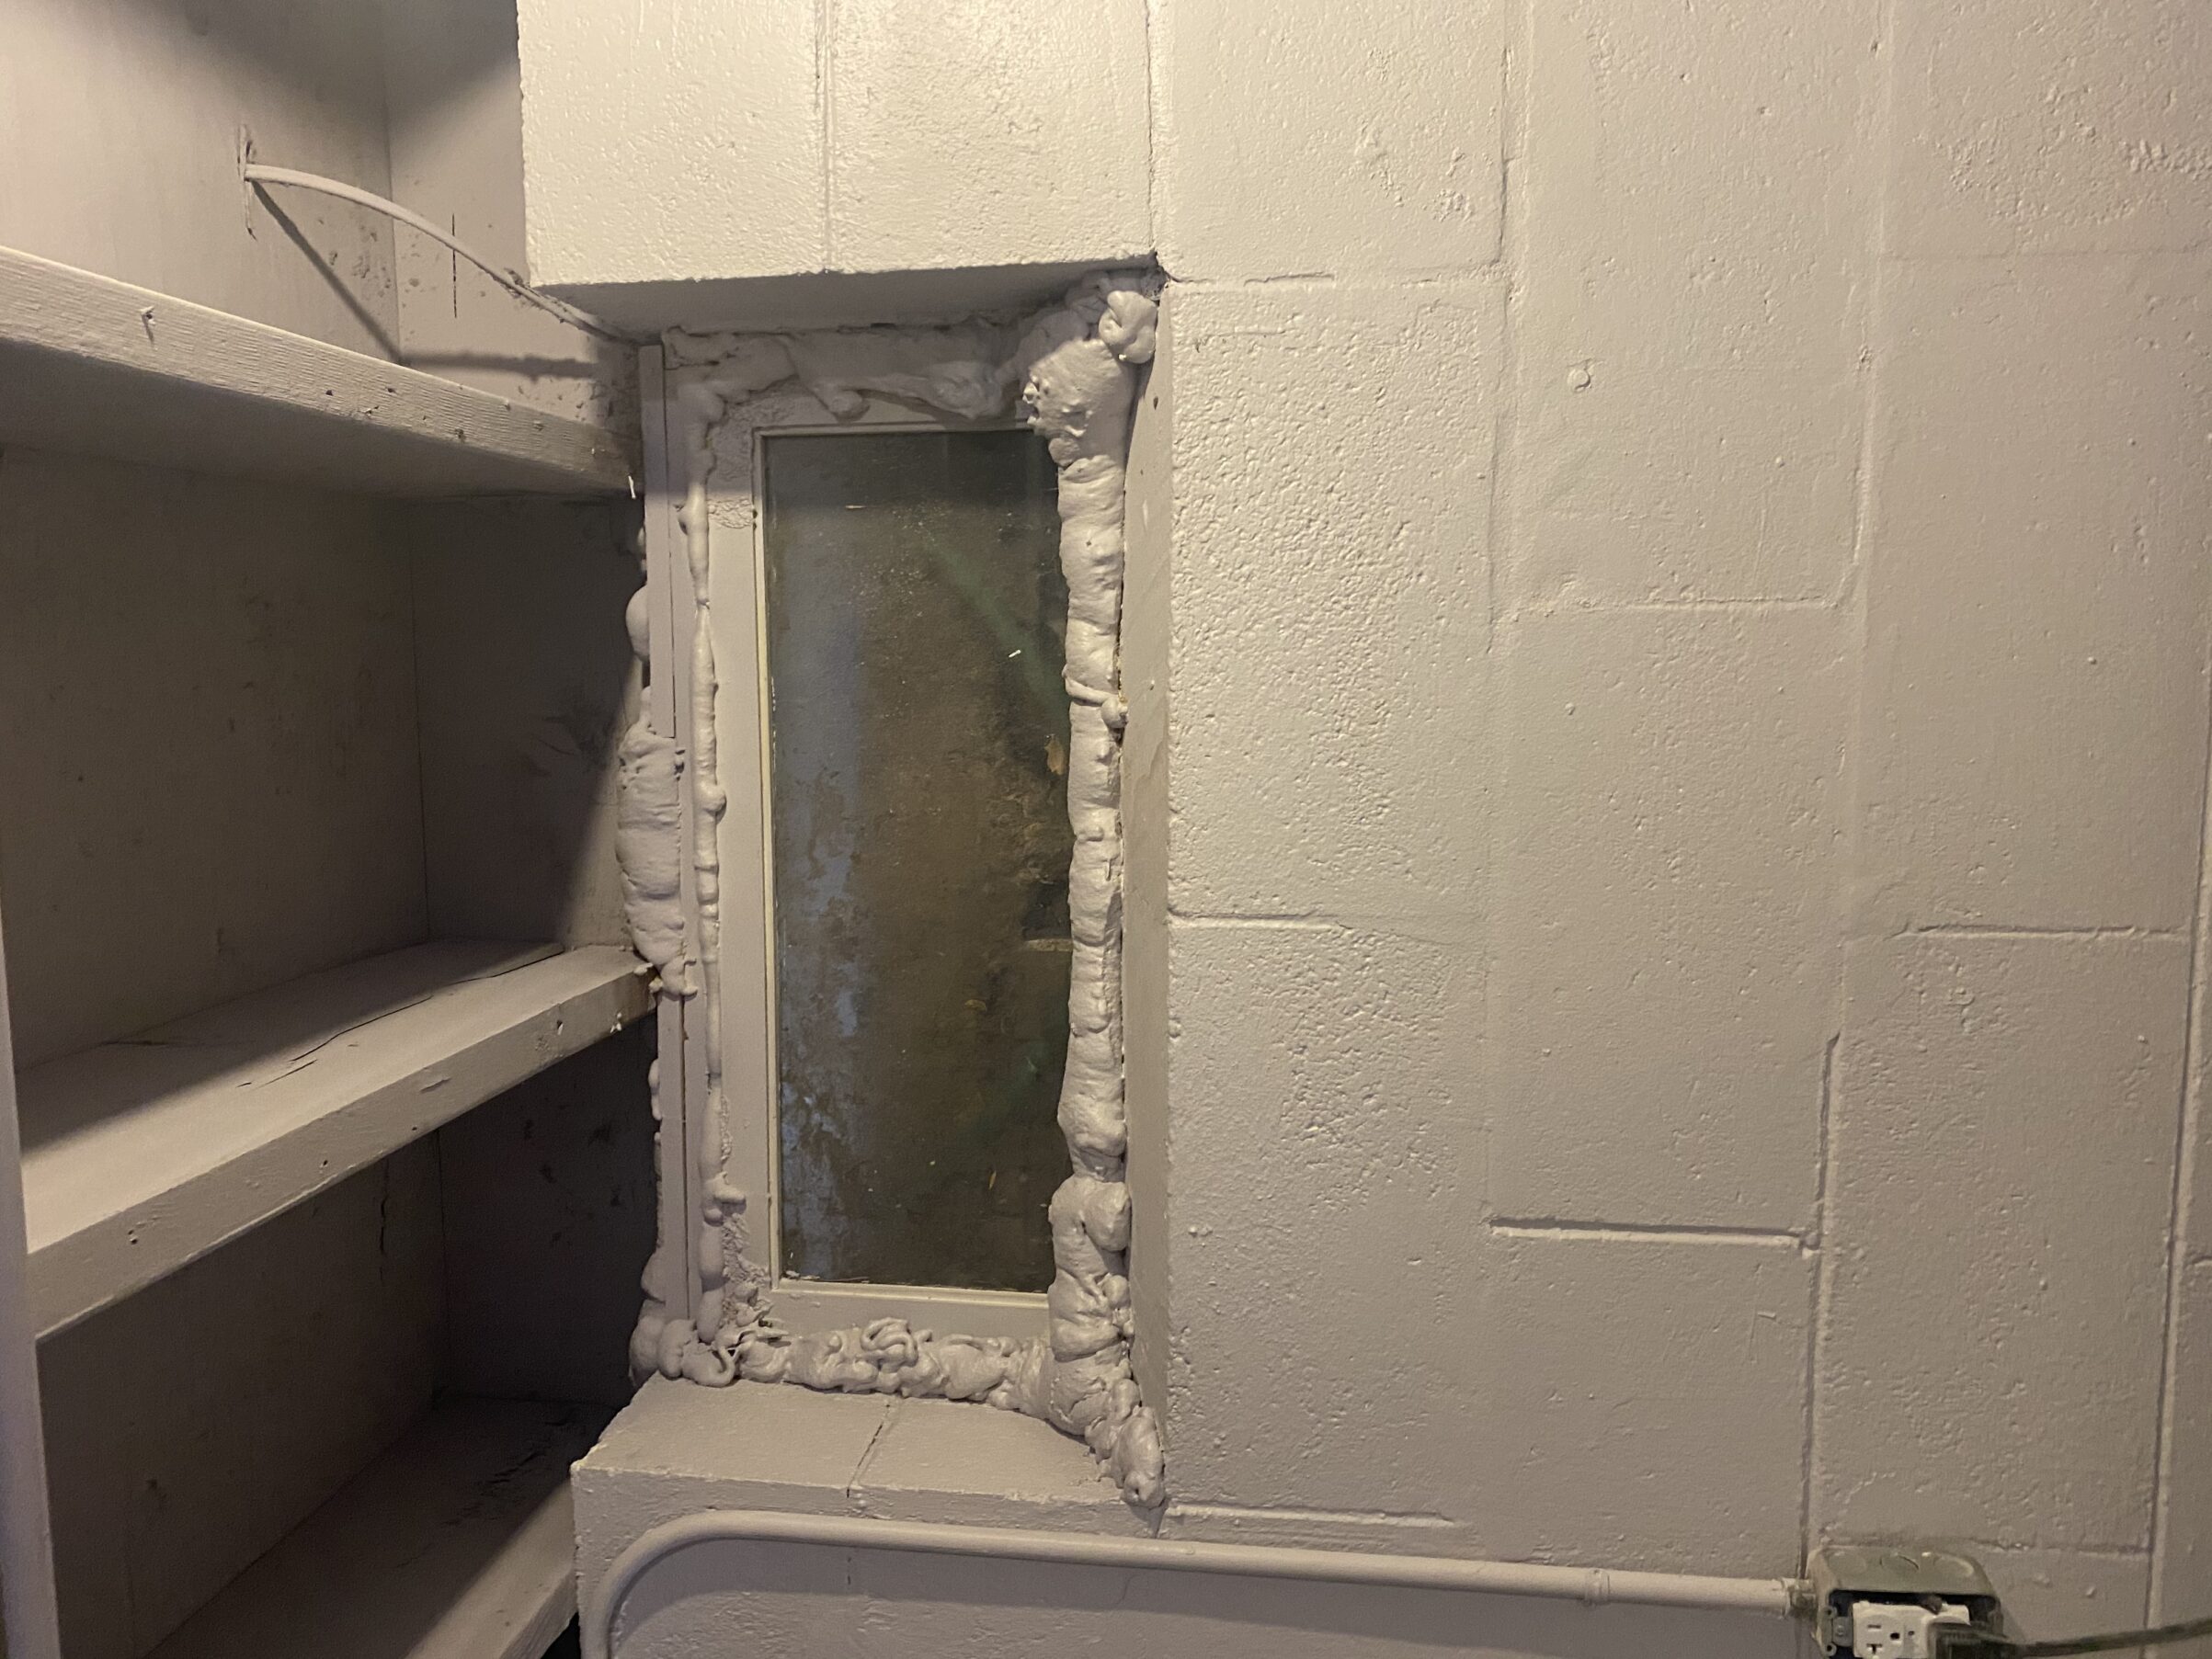 Contractor Scams Unfinished Work and Poor Craftsmanship